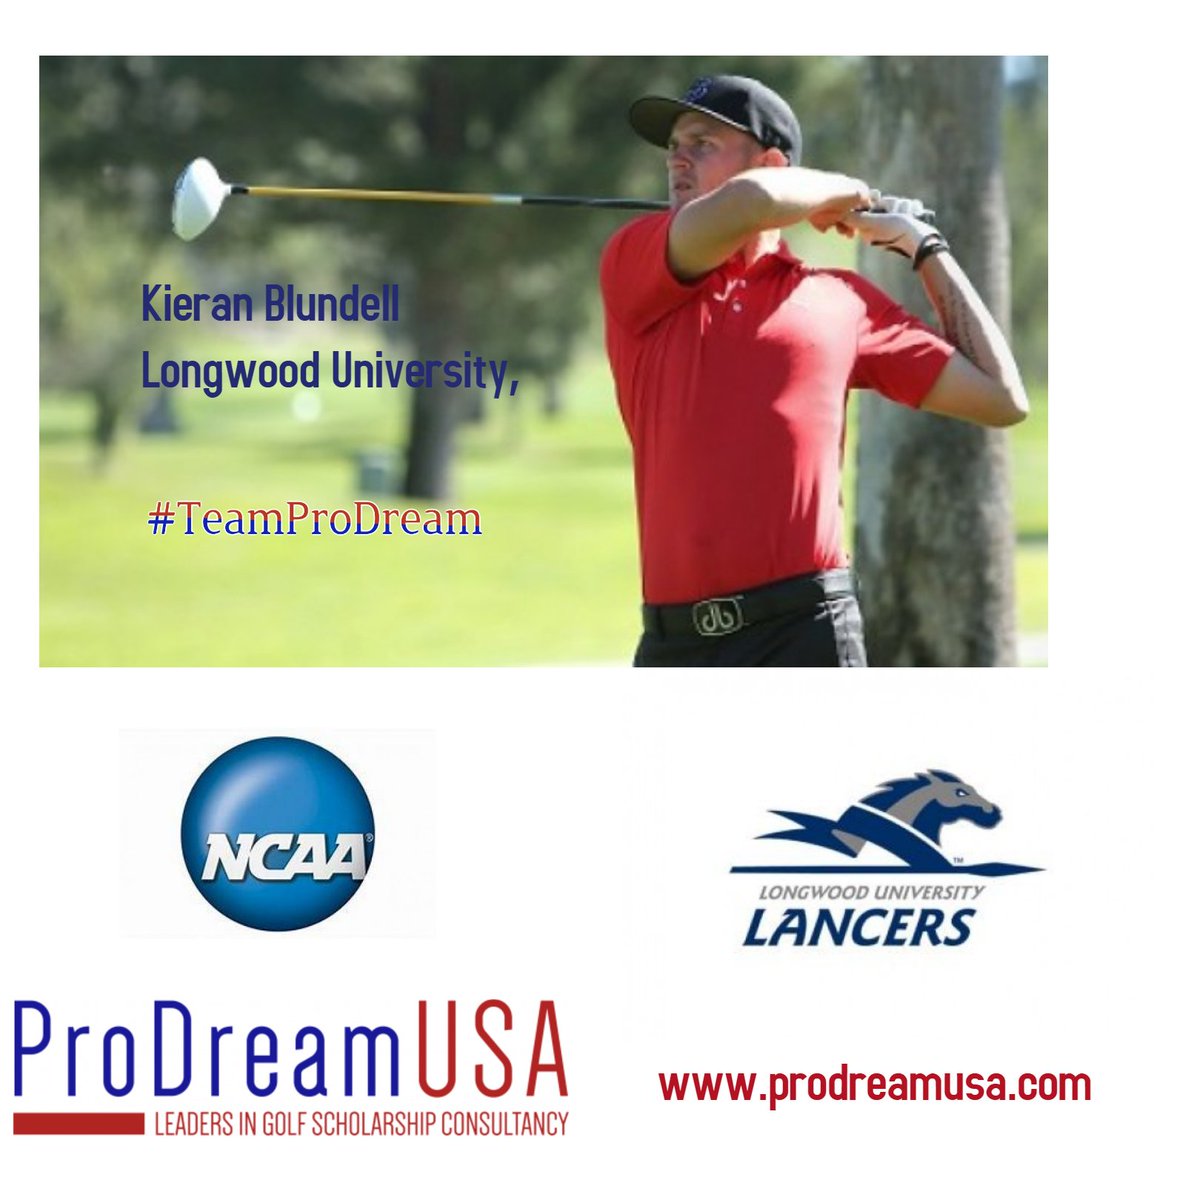 Congratulations to @prodreamusa client Kieran Blundell, a former pupil @StPetersSch and @OltonGolfClub member, who has completed a transfer from @MSJCedu to @LongwoodLancers 

Good luck Kieran, and all the best as you make the step up to #NCAAD1! 

#TeamProDream #BigTime #D1Golf